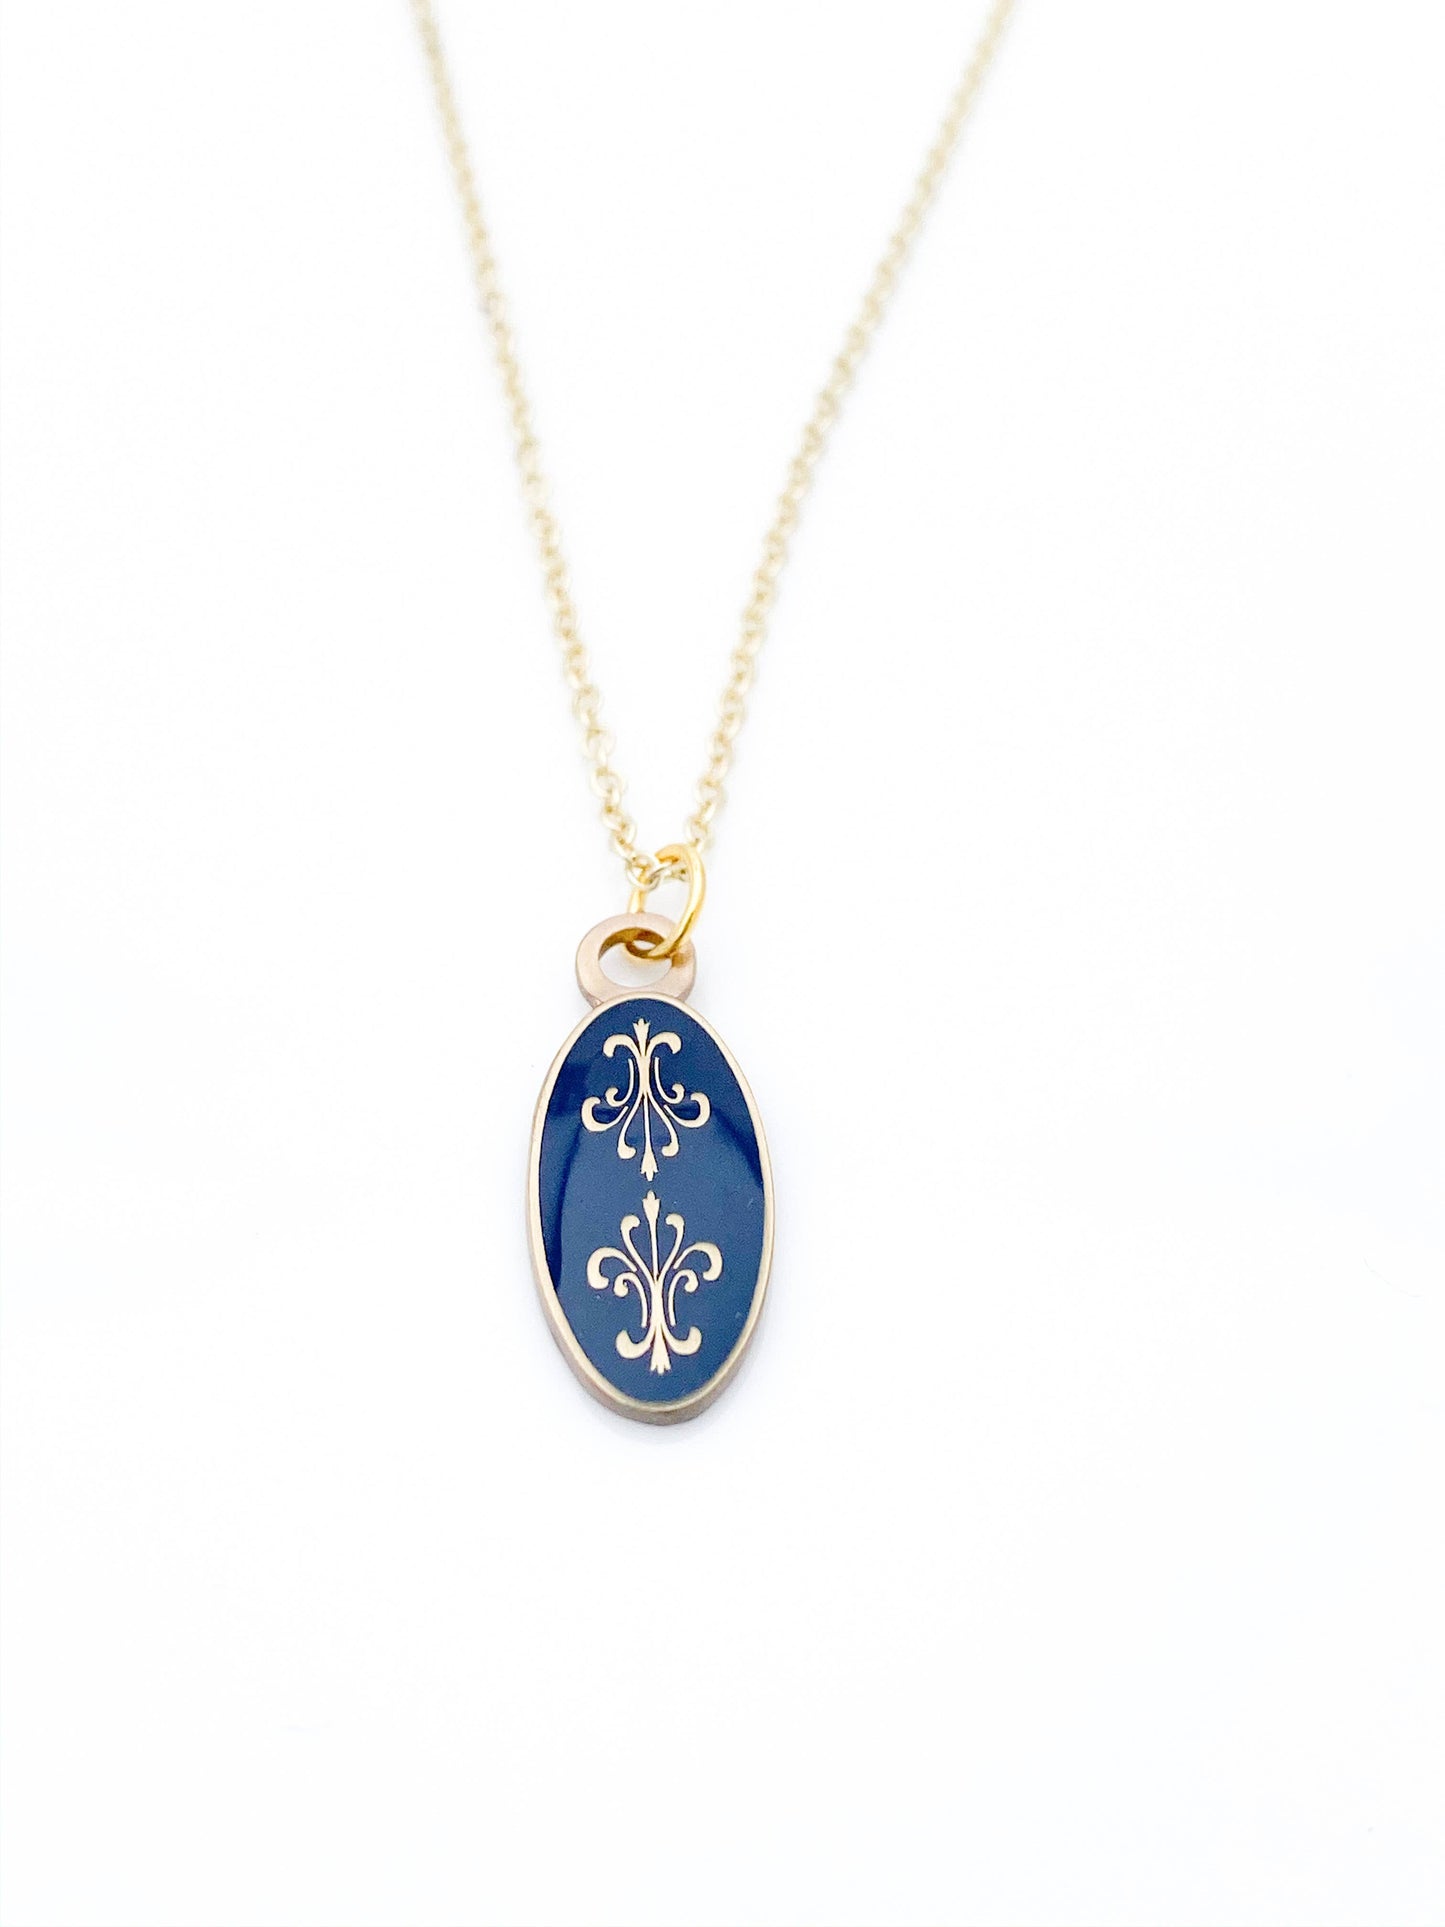 Antiqued gold oval necklace with two fleur de lys back to back on navy blue enamel